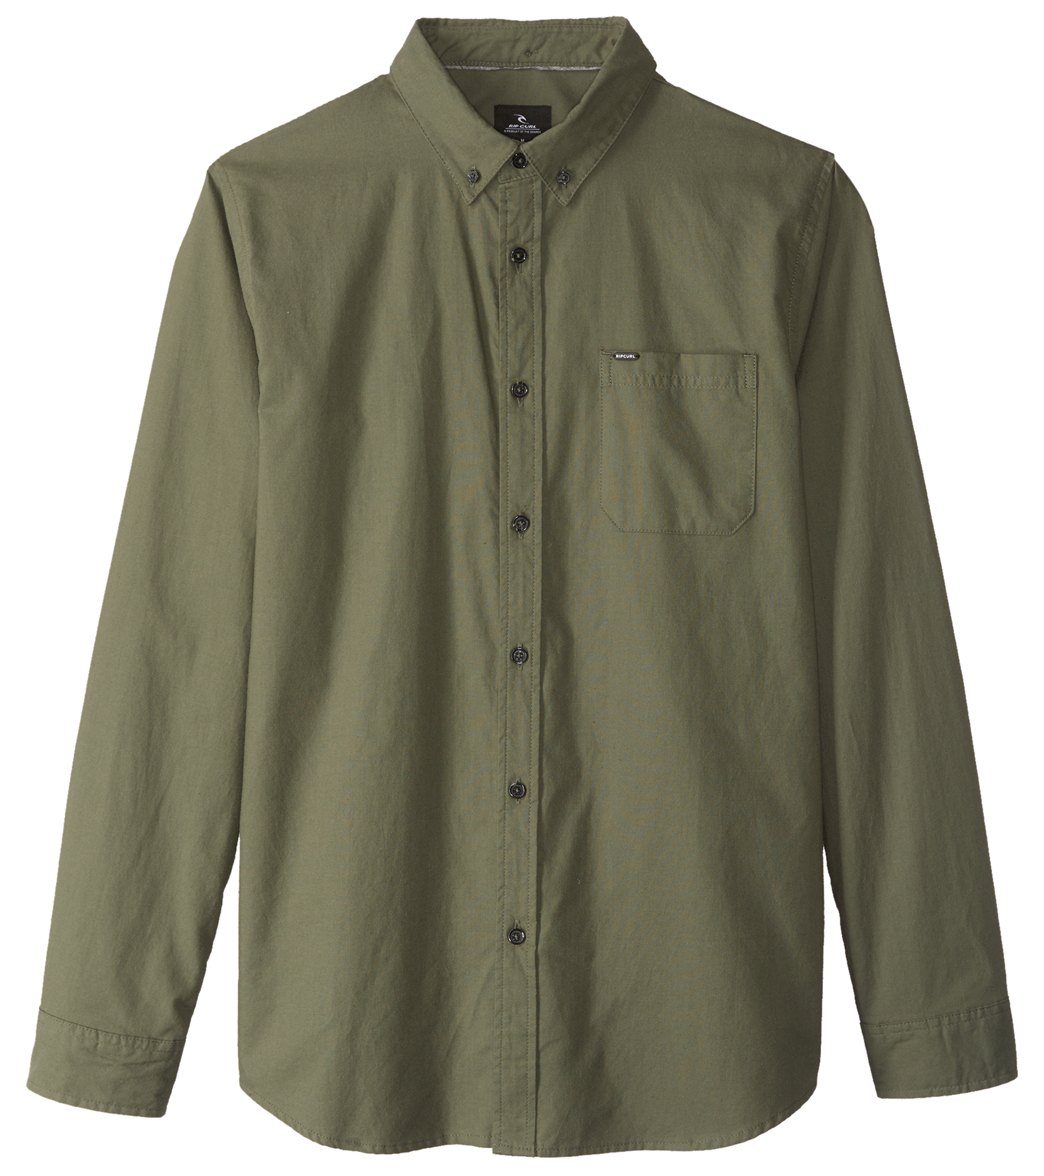 Rip Curl Men's Ourtime Long Sleeve Shirt - Green Small Cotton/Polyester - Swimoutlet.com